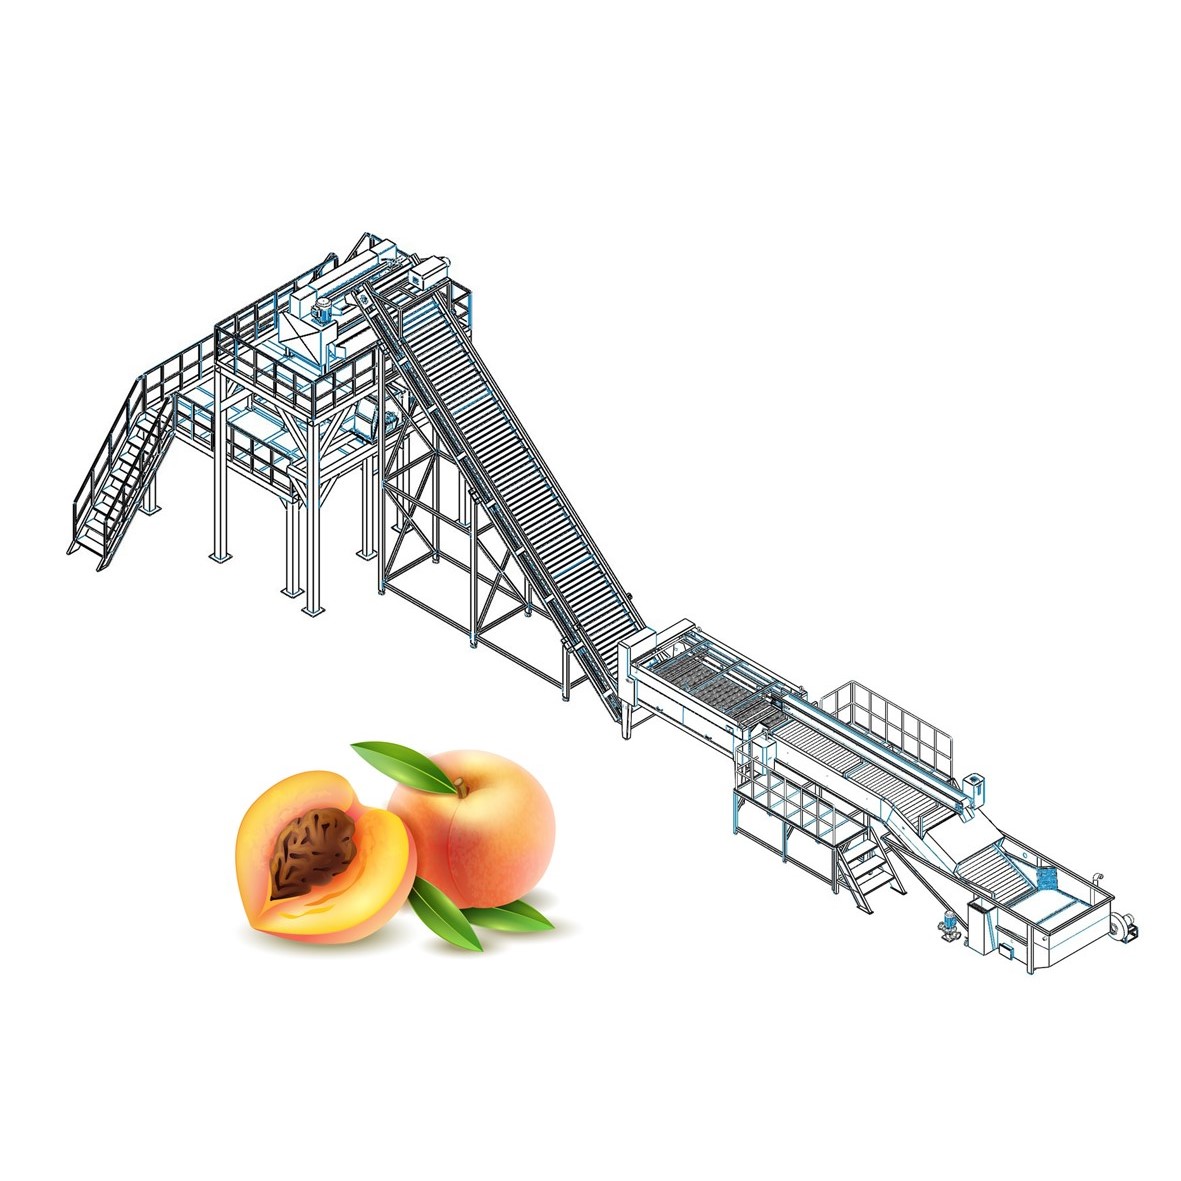 Peach, Apricot And Plum Processing Line